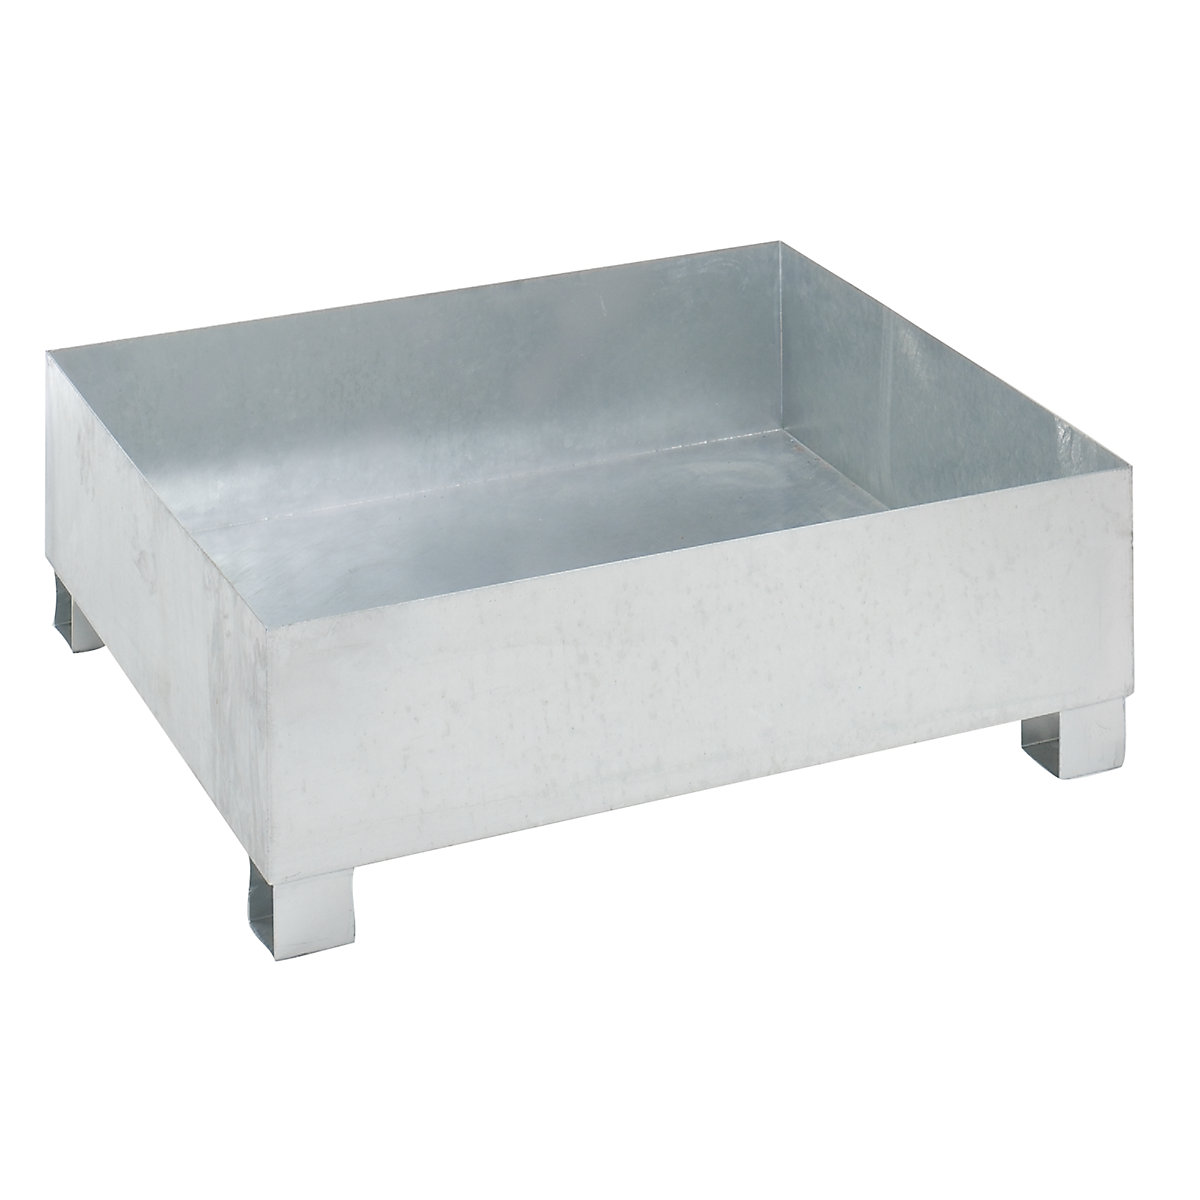 Steel sump tray for 200 l drums – eurokraft basic